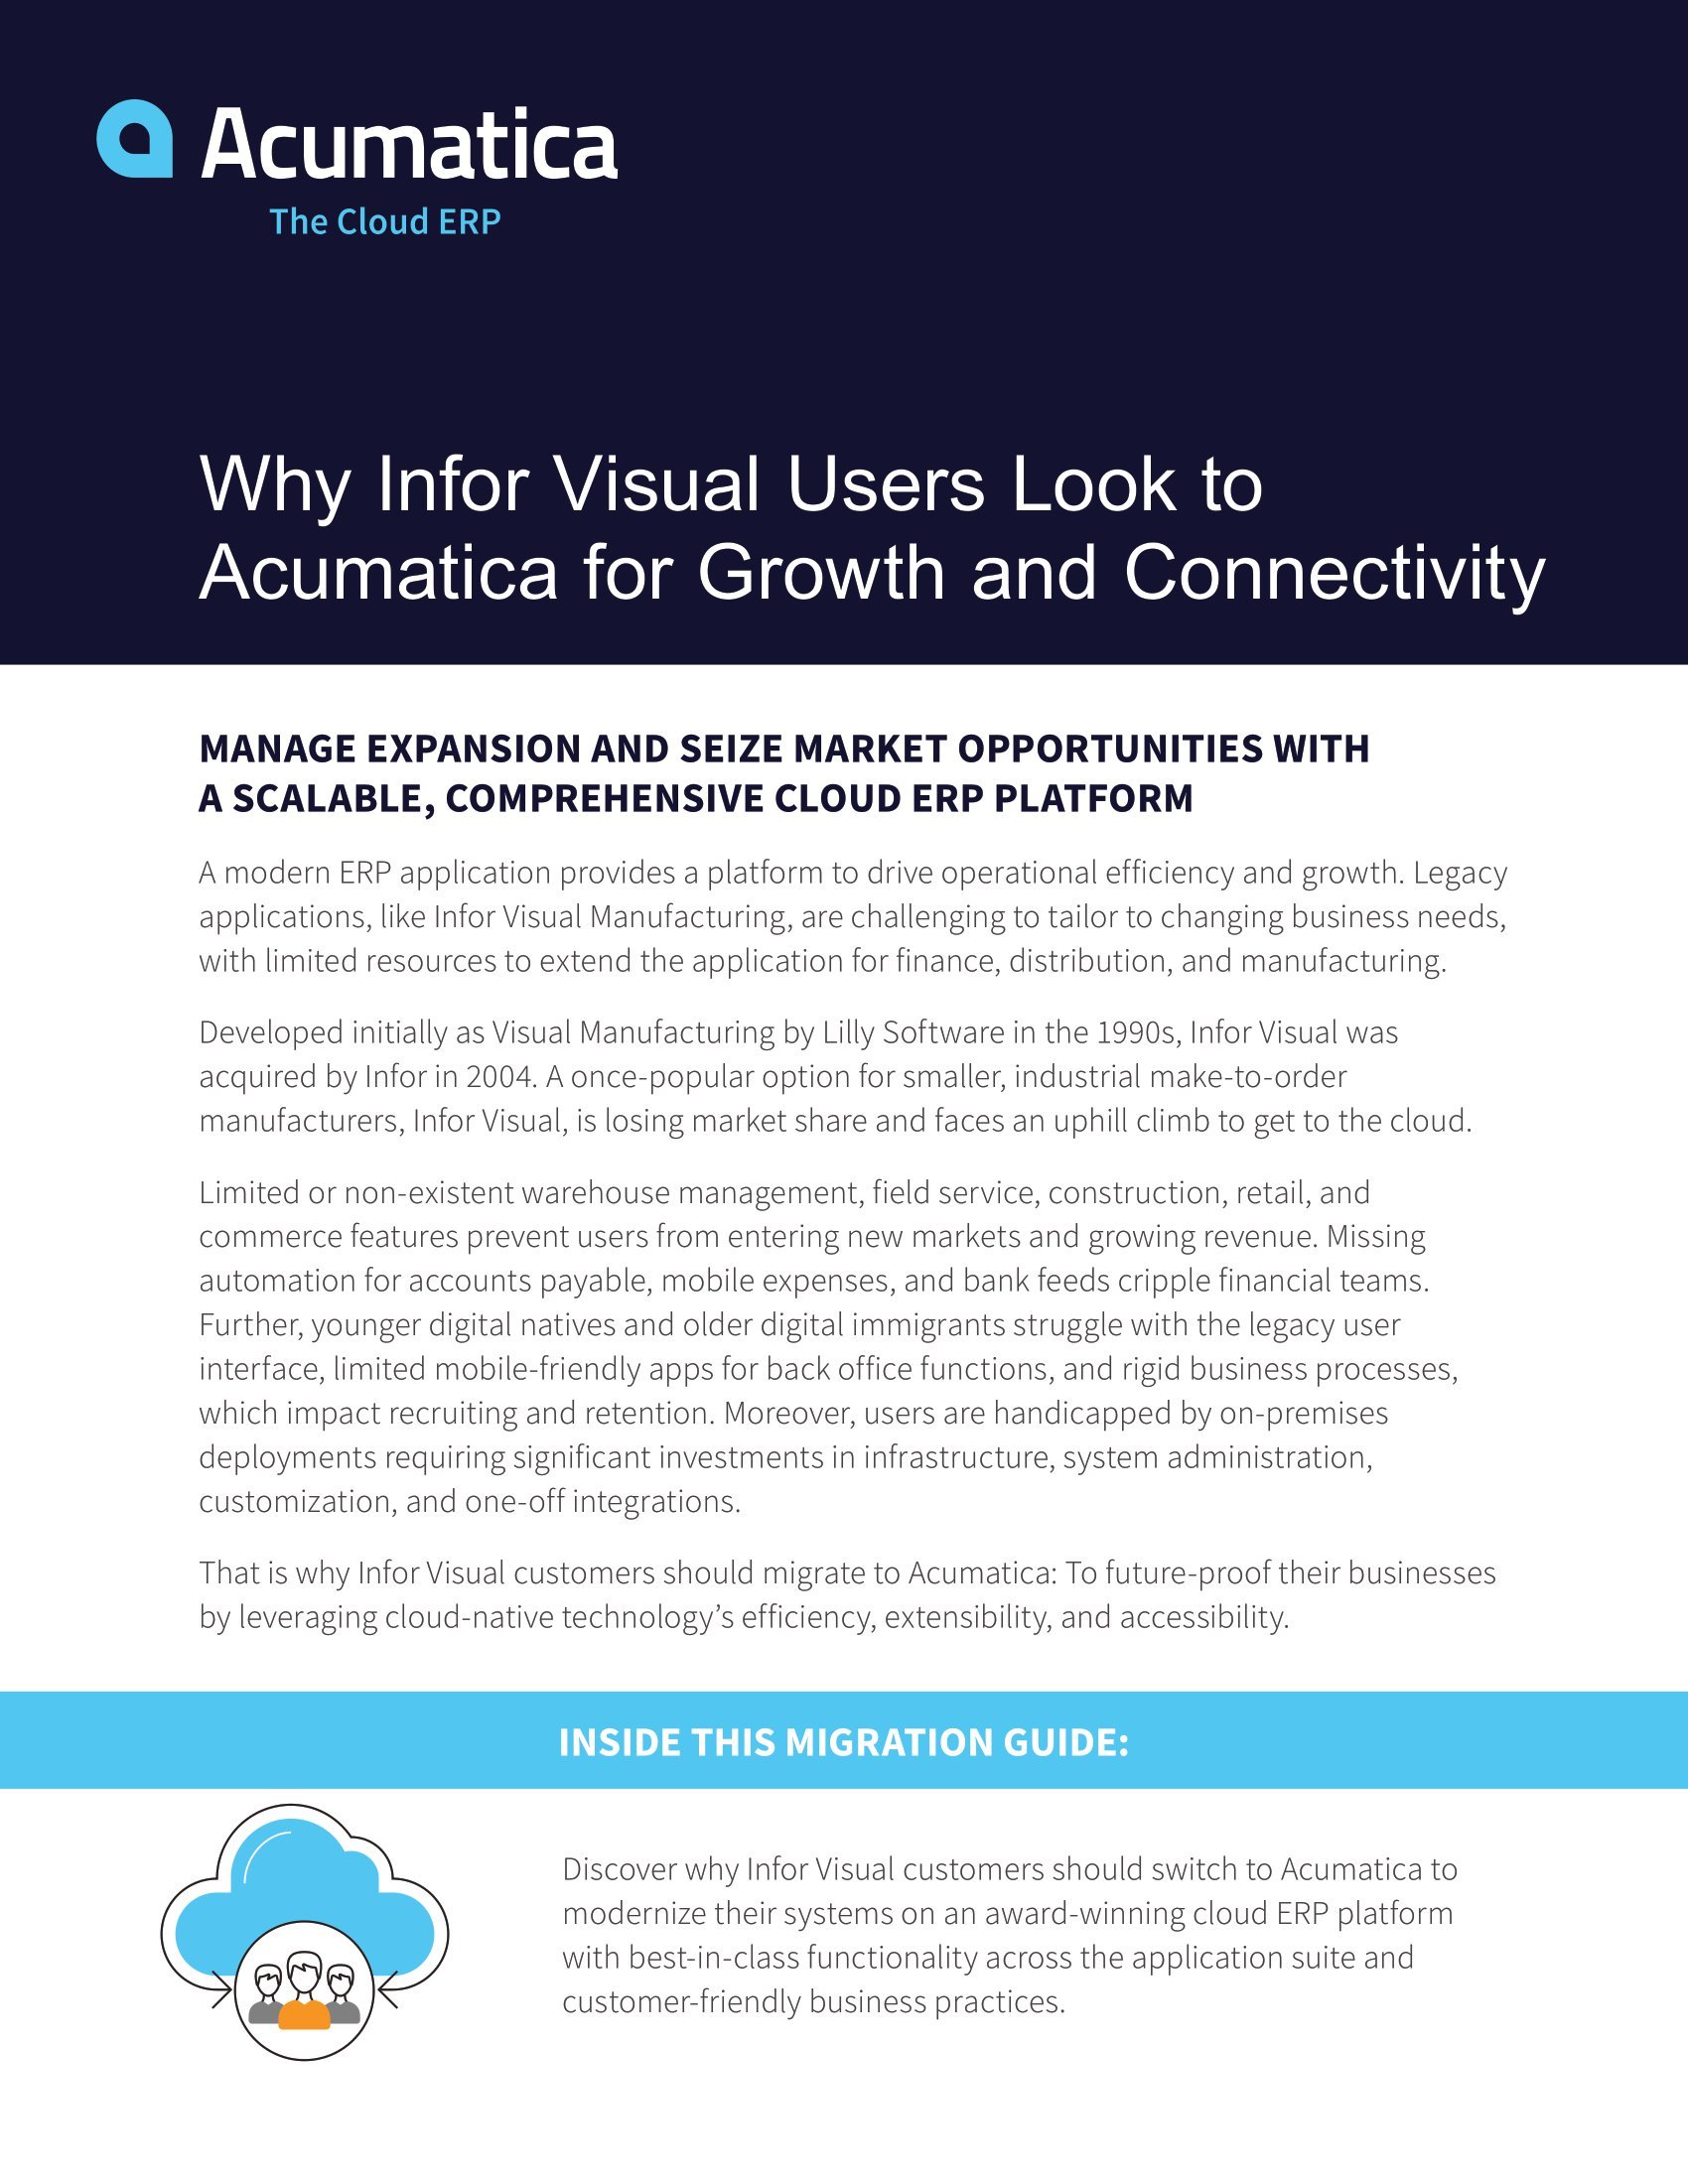 An Infor Visual Migration Guide Reveals Why Today’s Manufacturers Should Switch to Acumatica, page 0